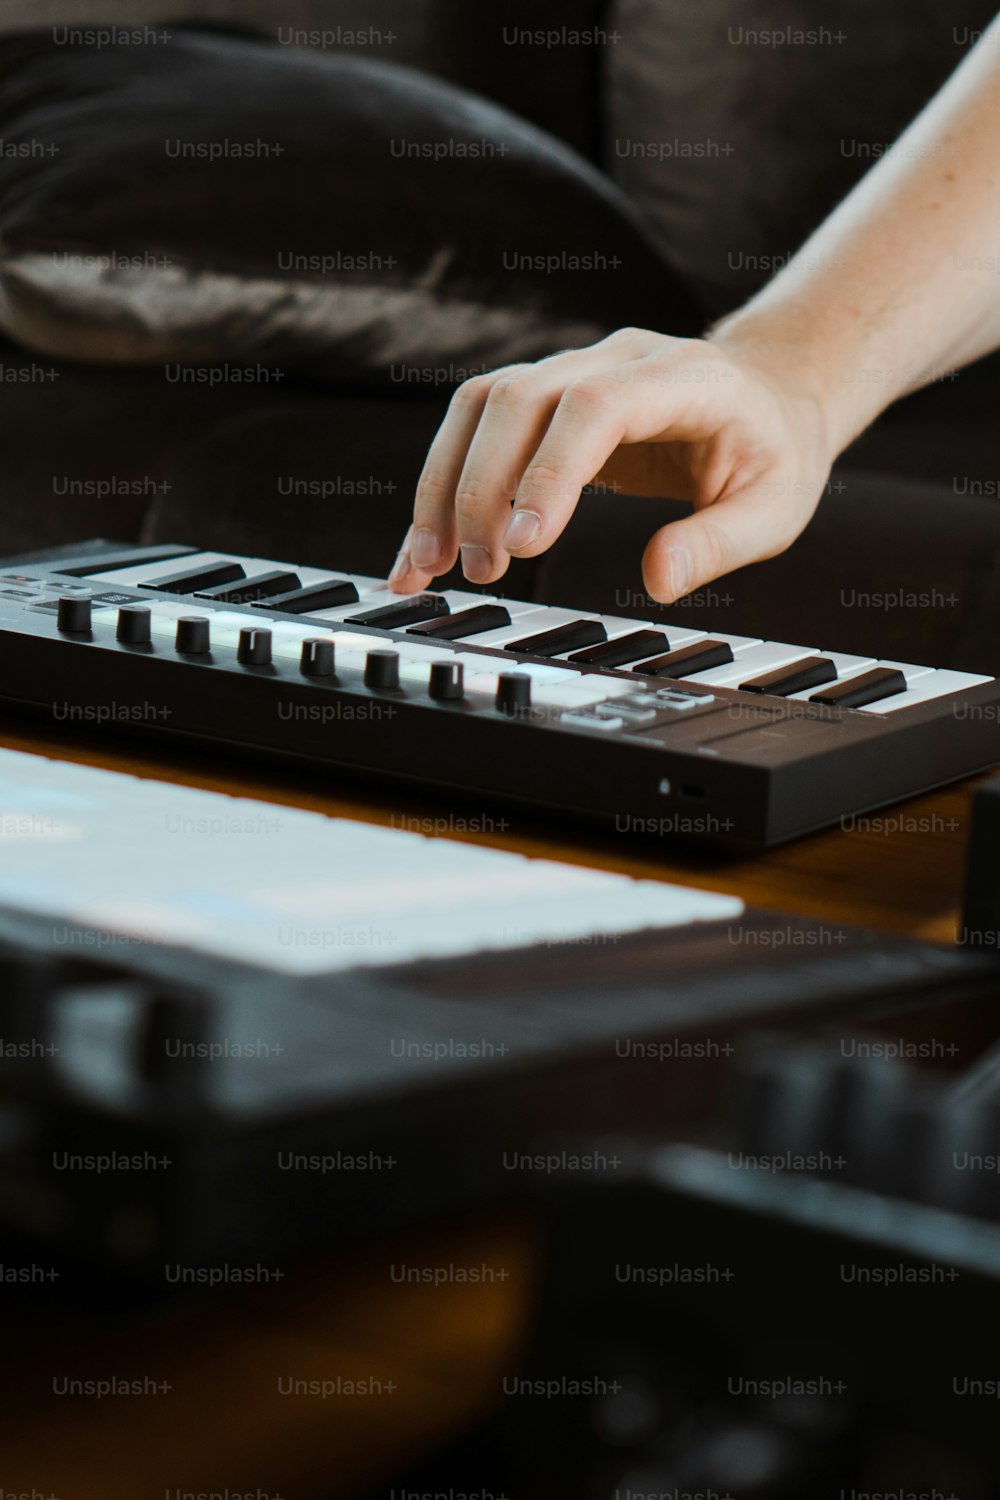 a person using a keyboard on a table